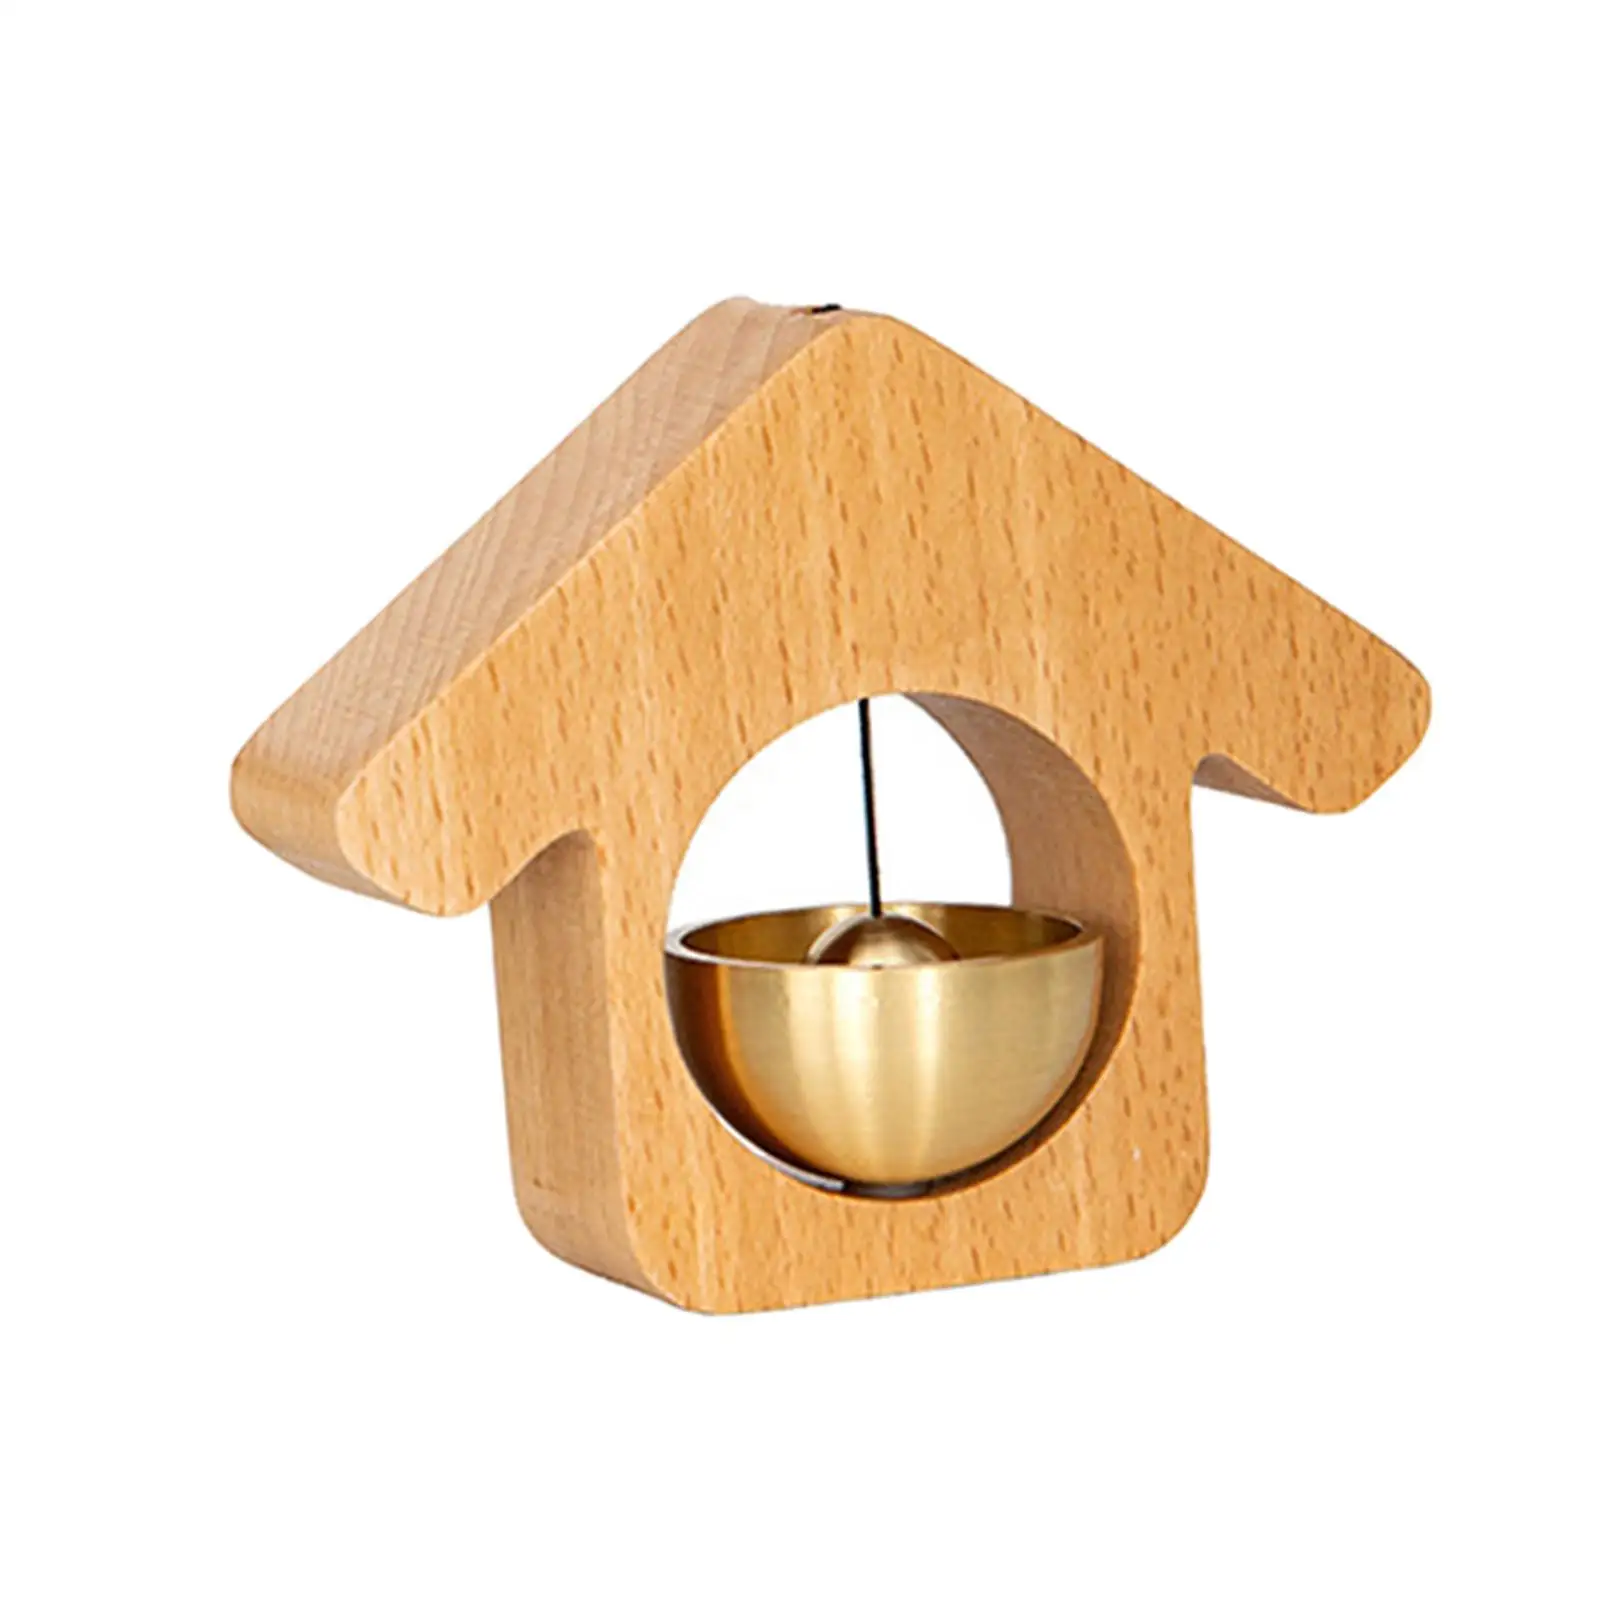 Wood Shopkeepers Bell Decorative Door Chime Hanging Bell Gate Bell Chime for